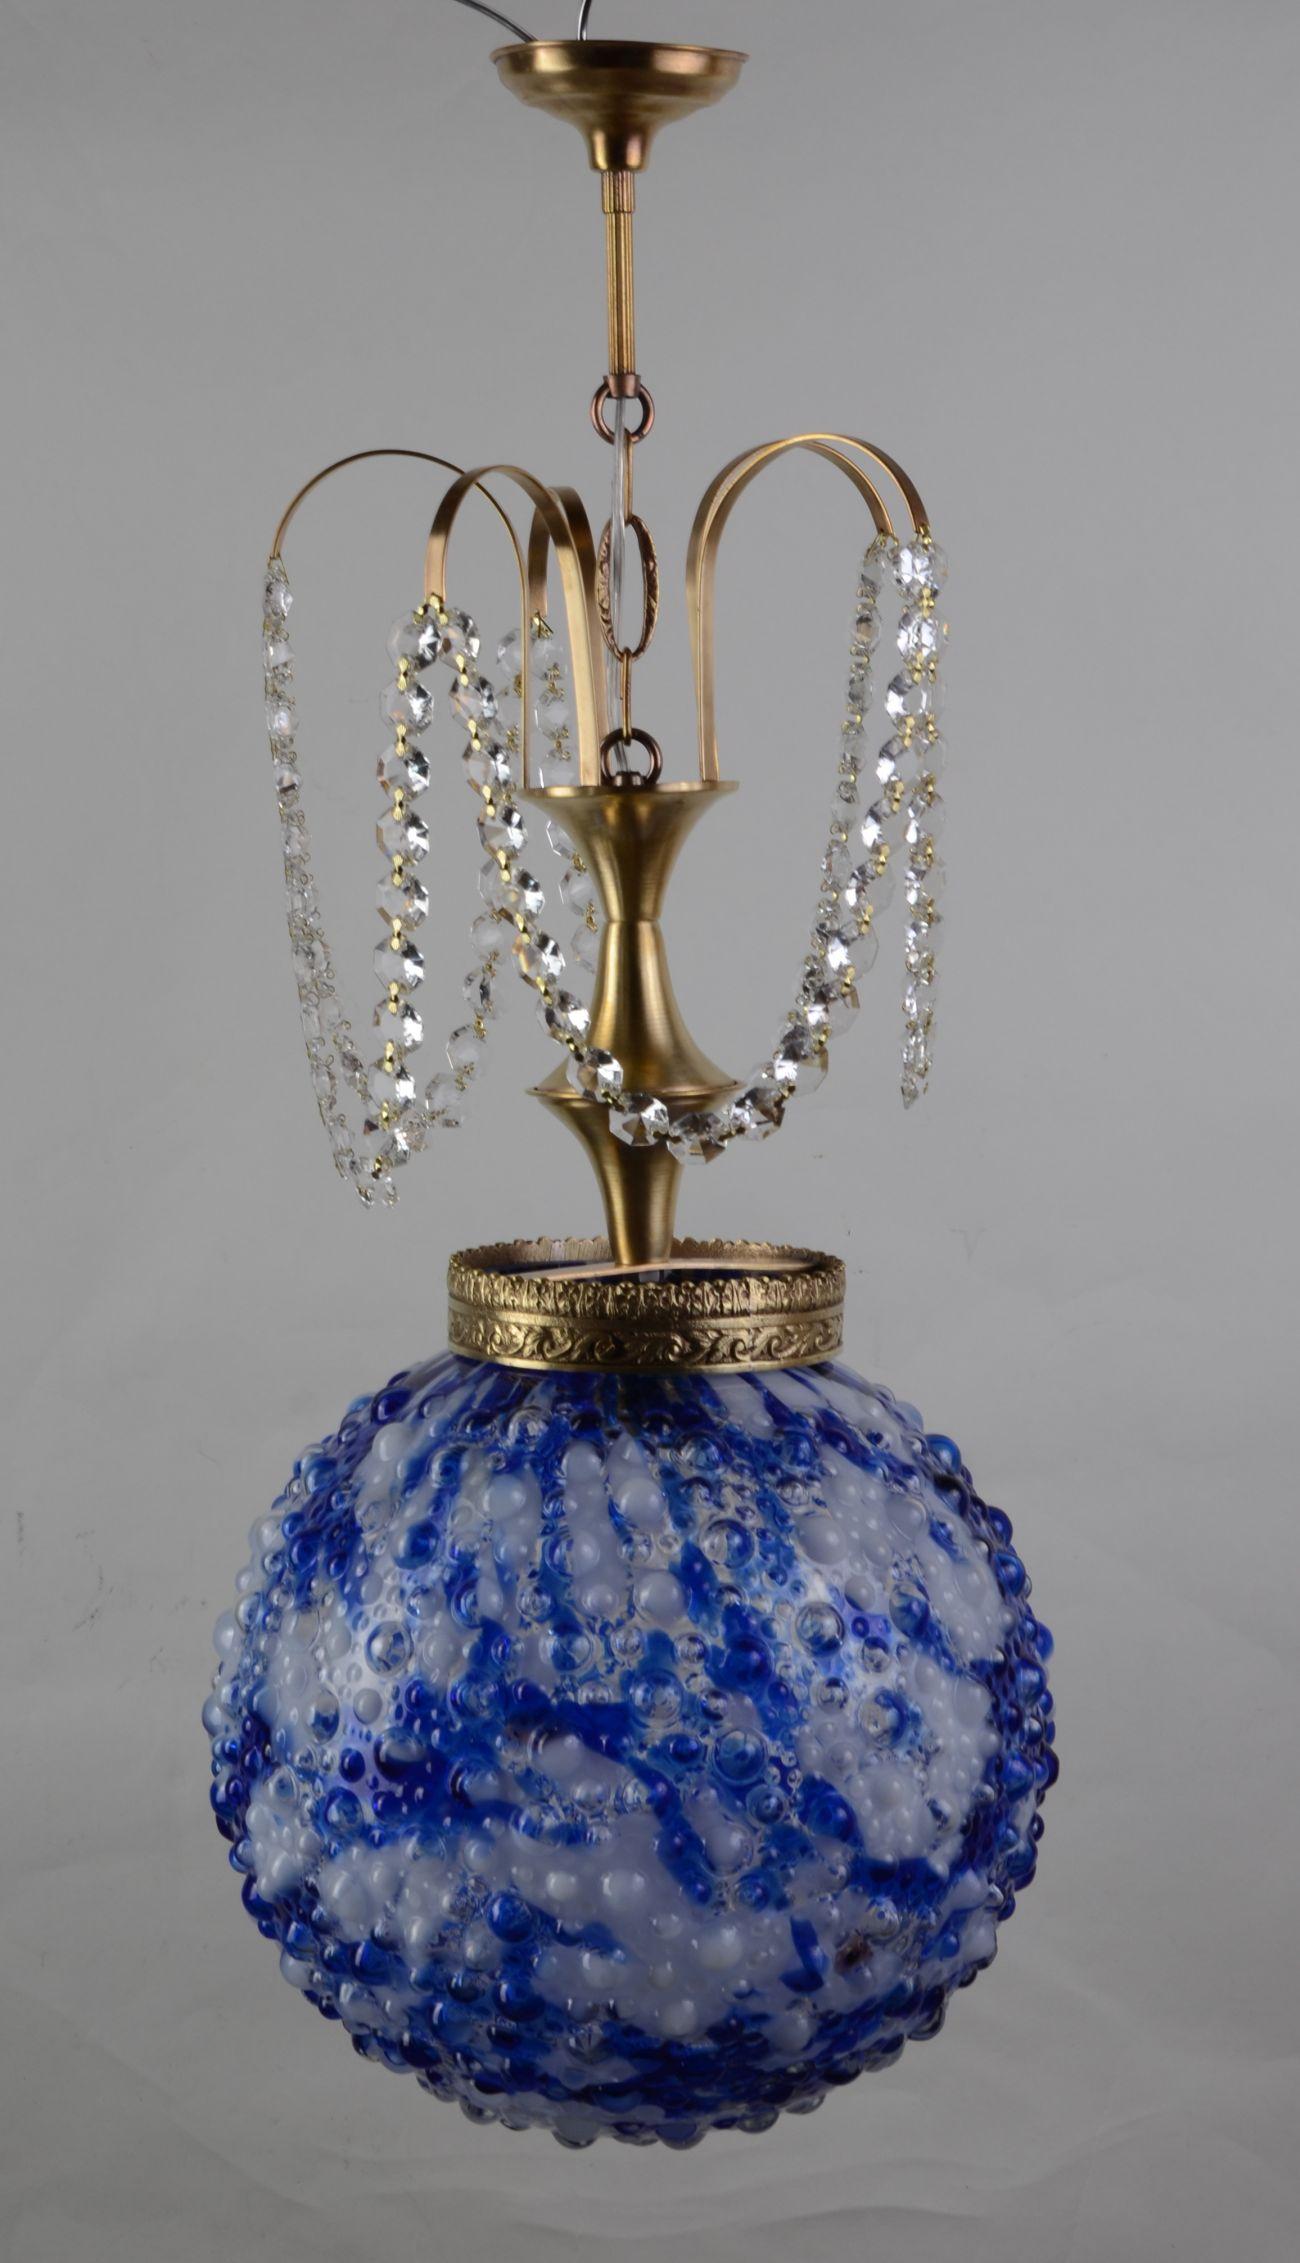 1950s ceiling lamp with original Murano glass lampshade from Spain
The lamp is great and one of a kind! The object's construction elements were made of gold-coloured brass. The characteristic element is the original white-blue Murano lampshade with